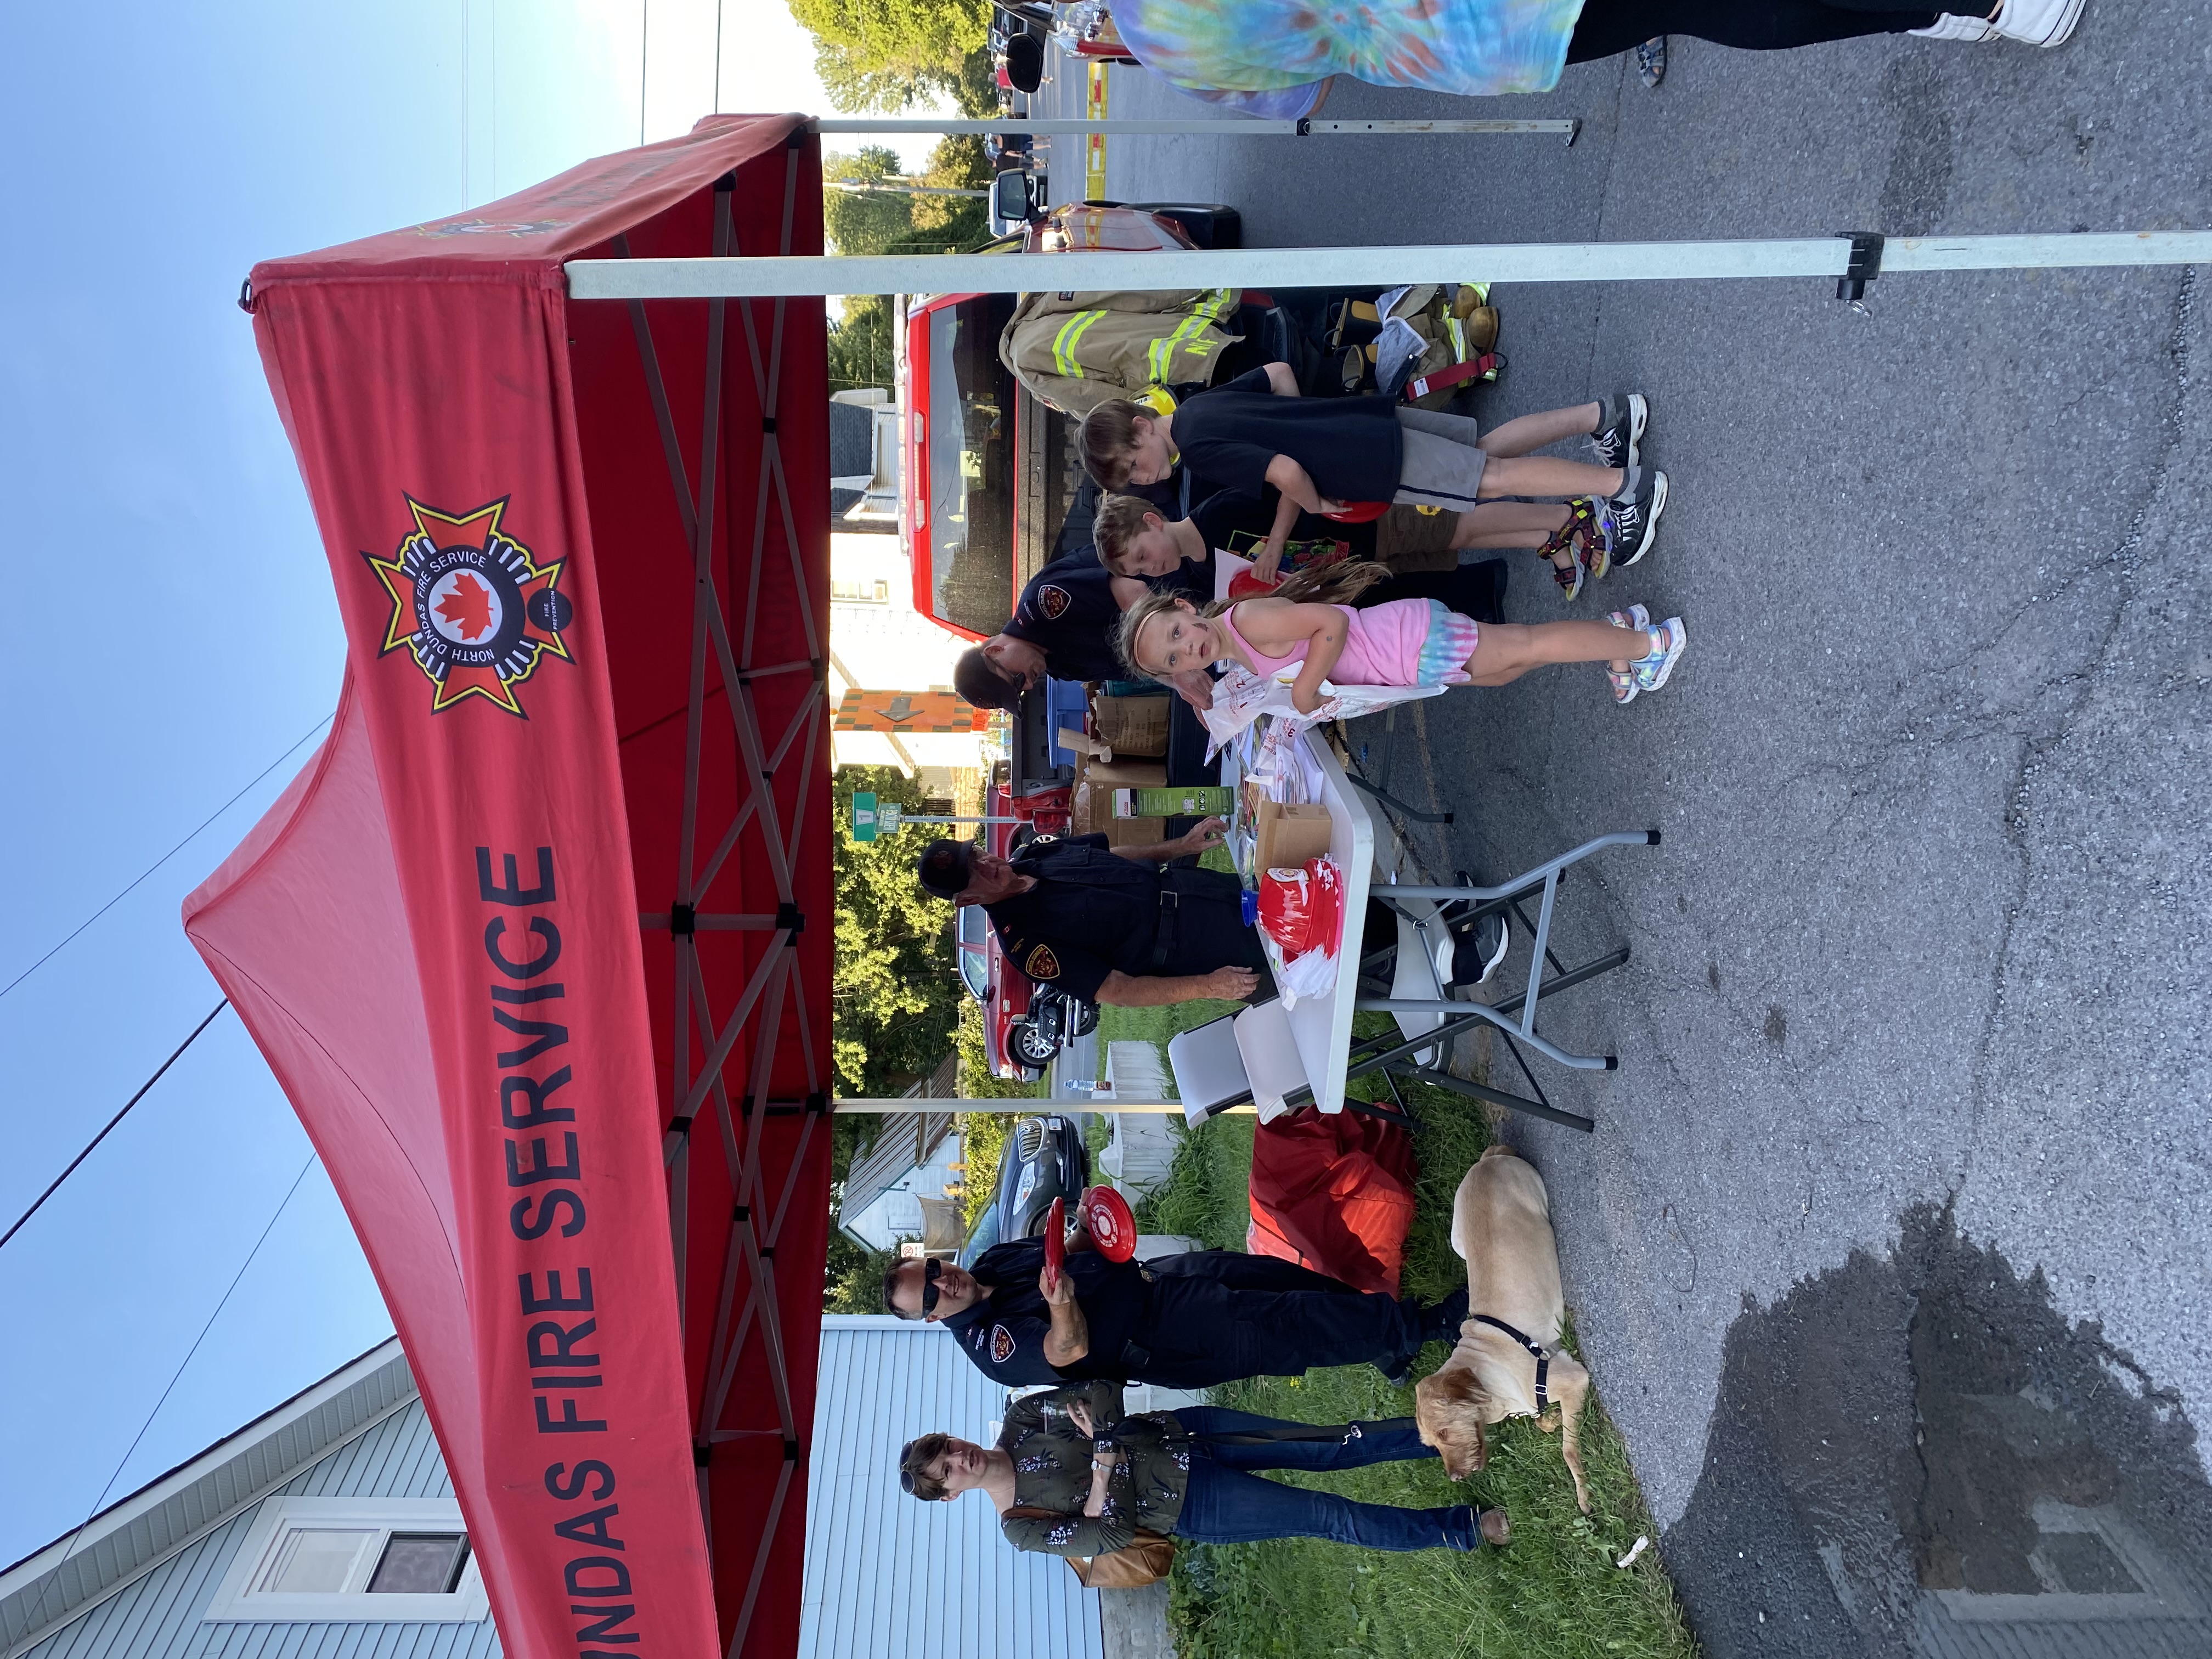 People lined up at Fire Prevention booth in Hallville at MMOMS